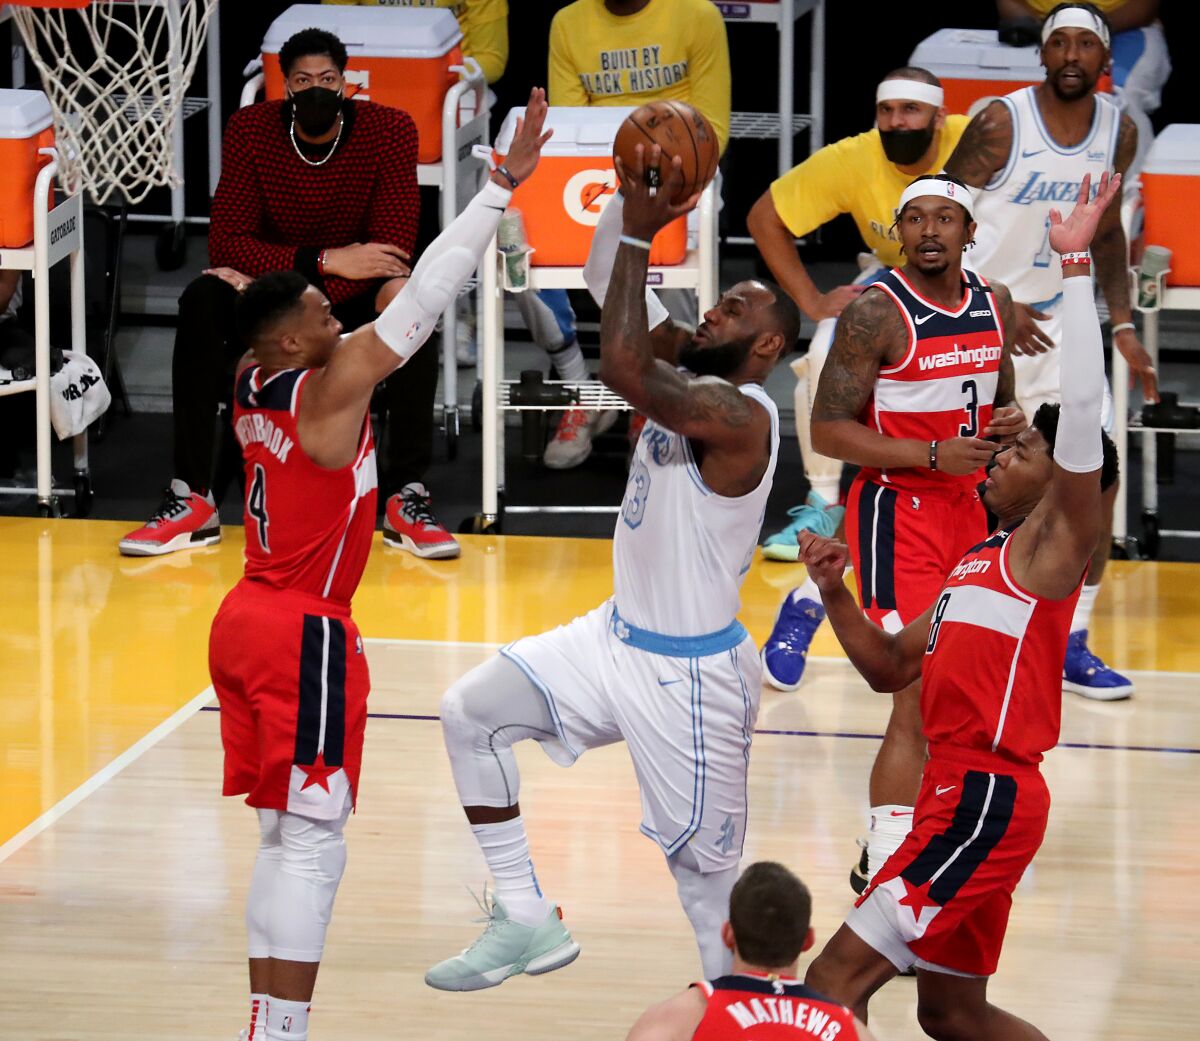 Lakers forward LeBron James slices to the basket against the Washington Wizards in the first quarter Monday.